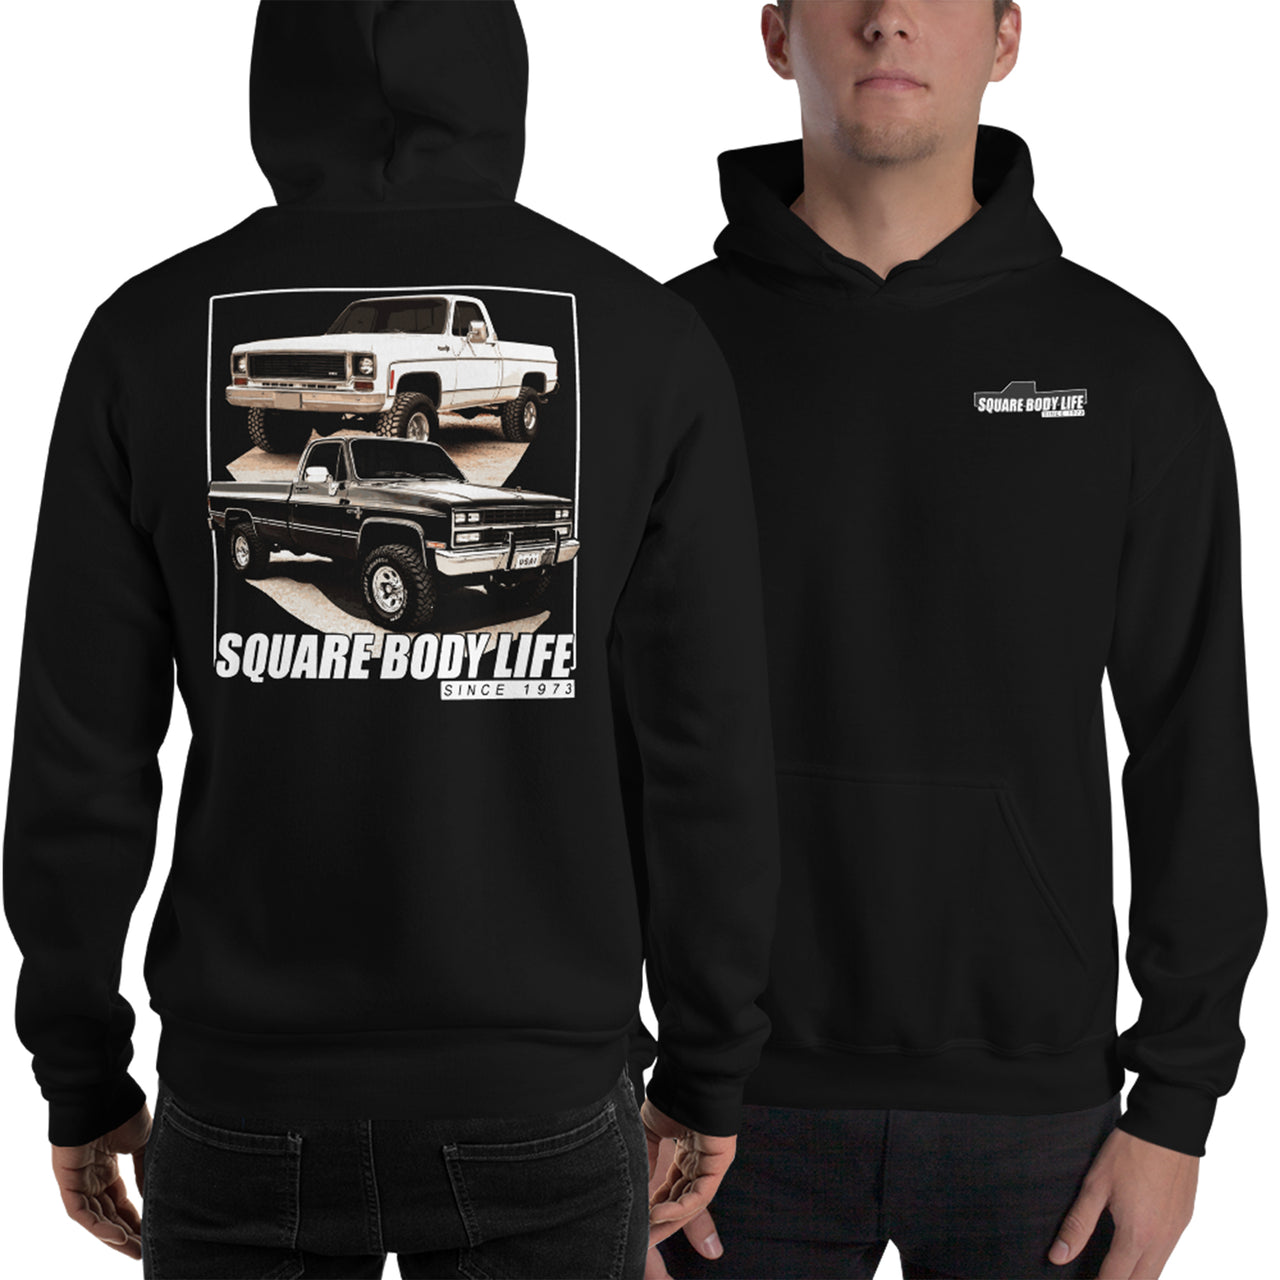 Square Body Life Hoodie modeled in black